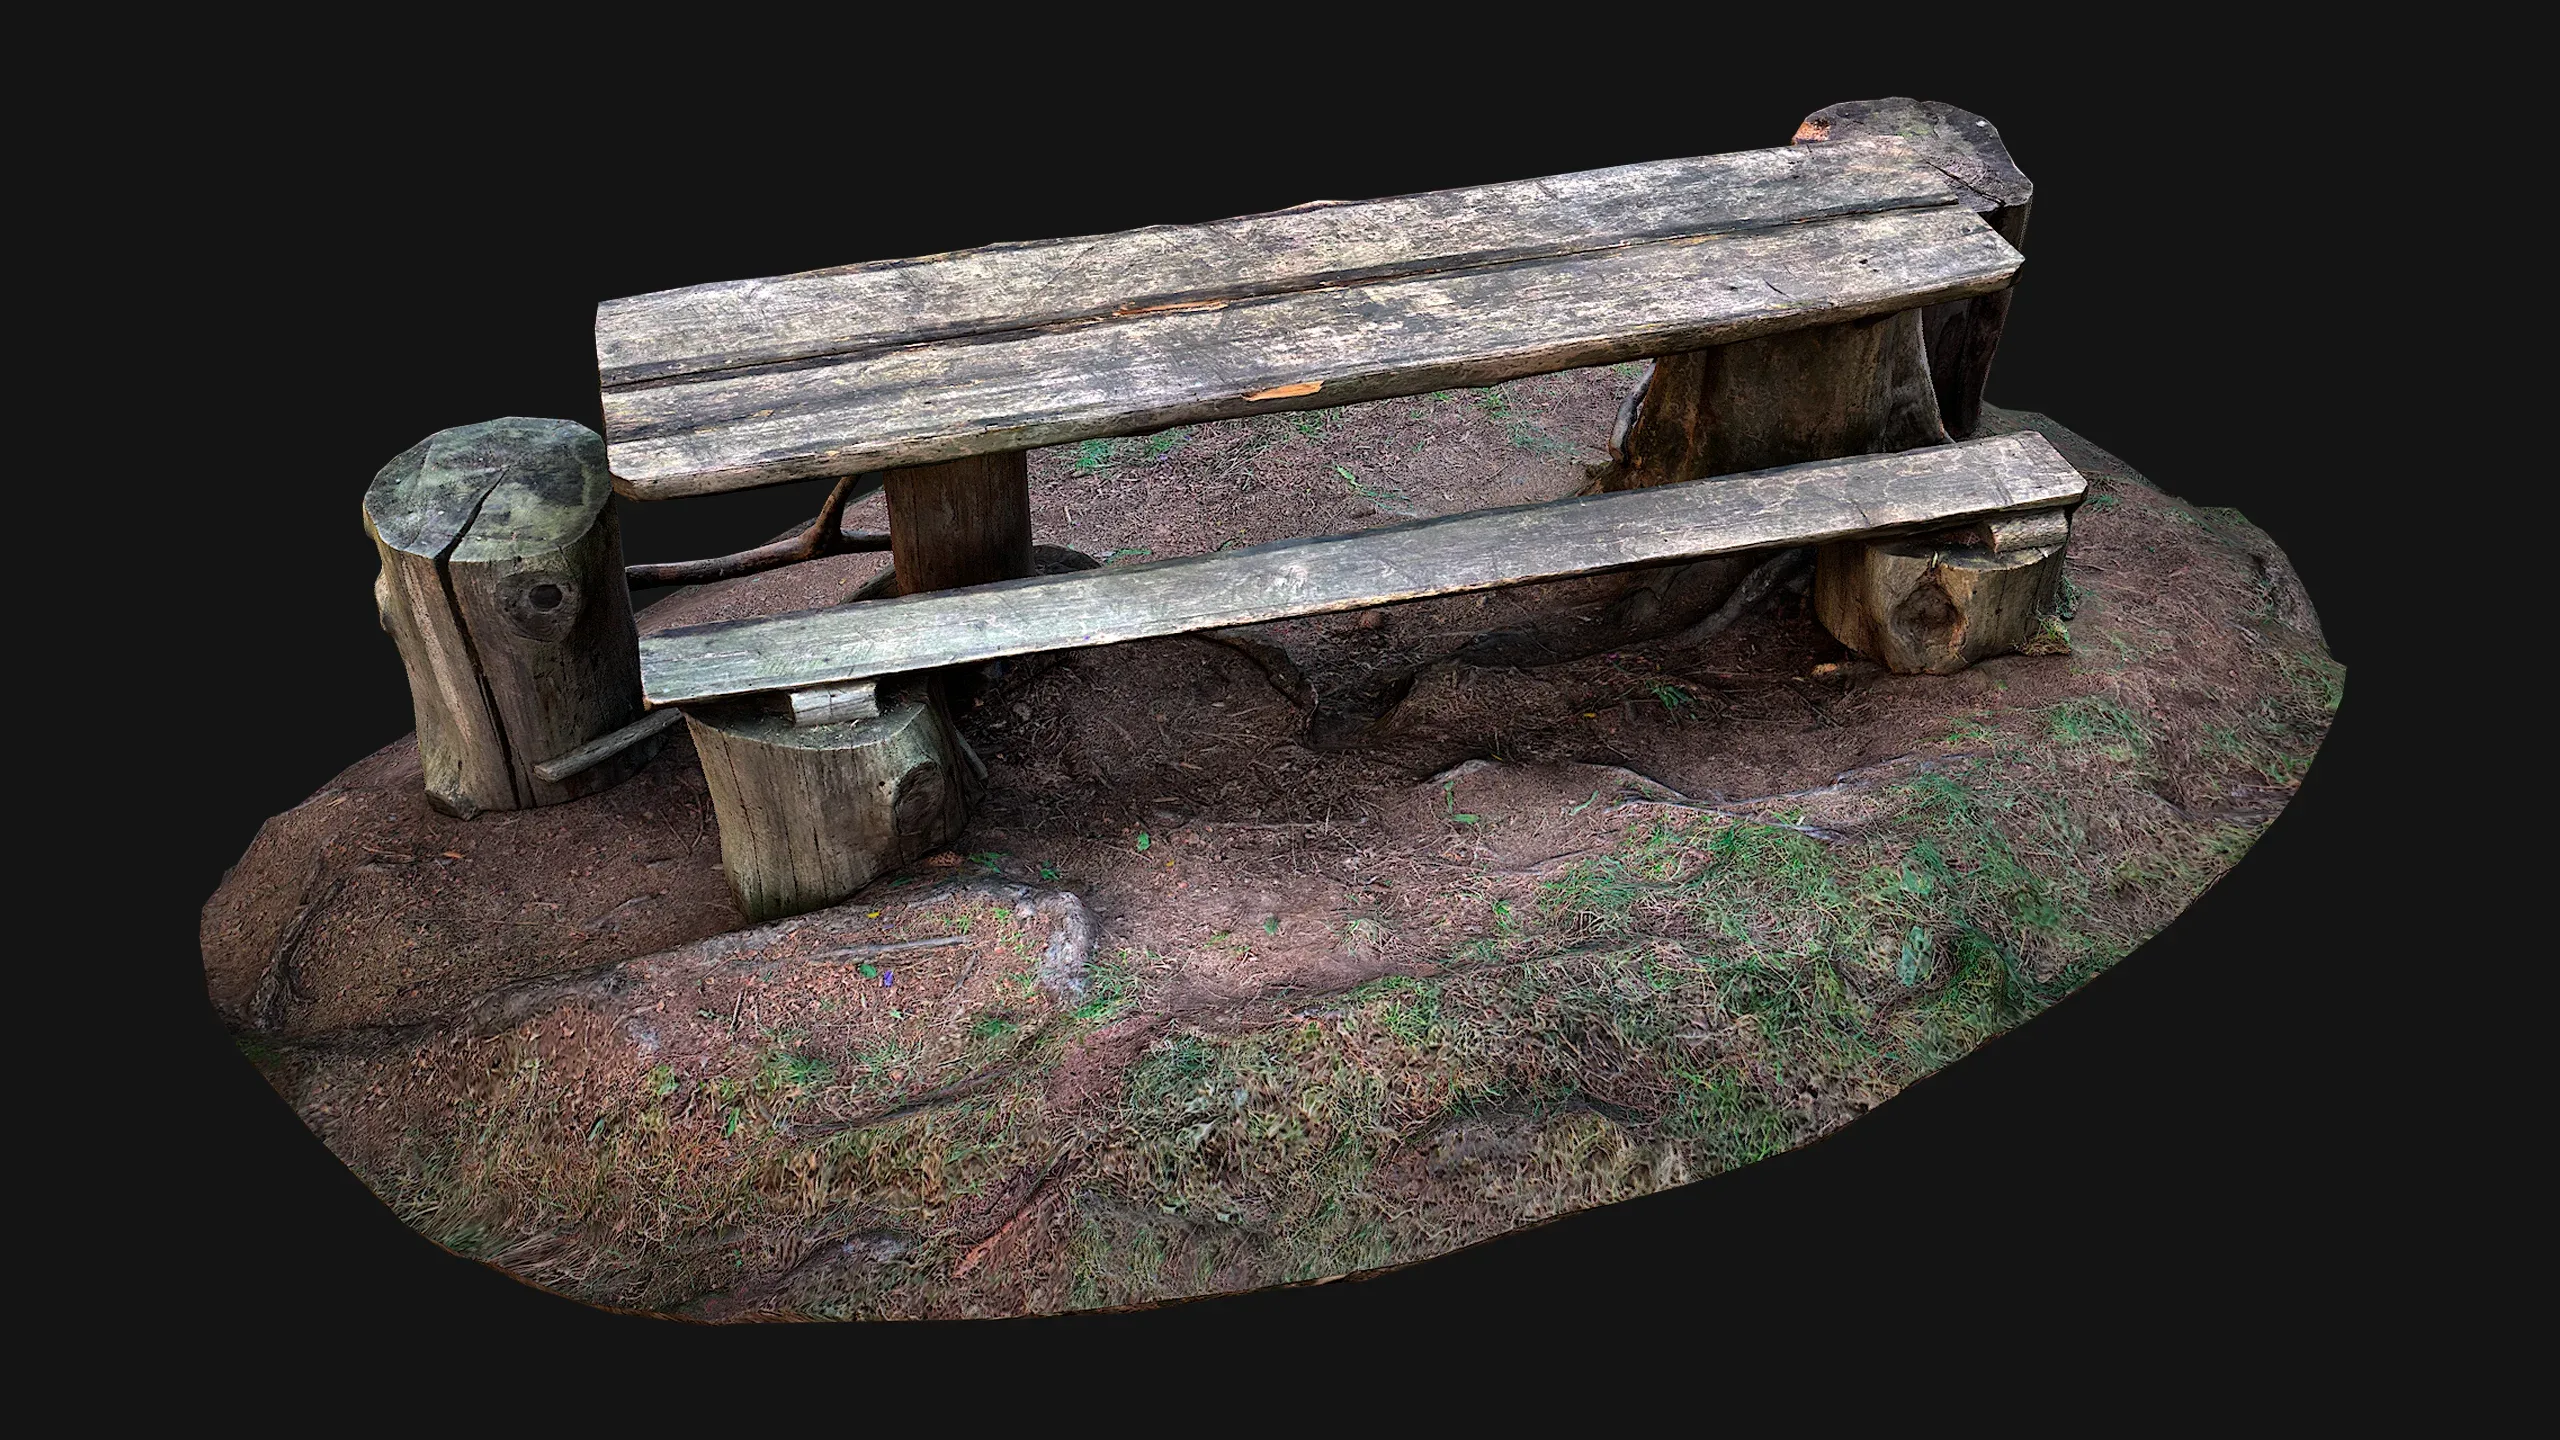 Medieval Wooden Bench and Table in the Mountains